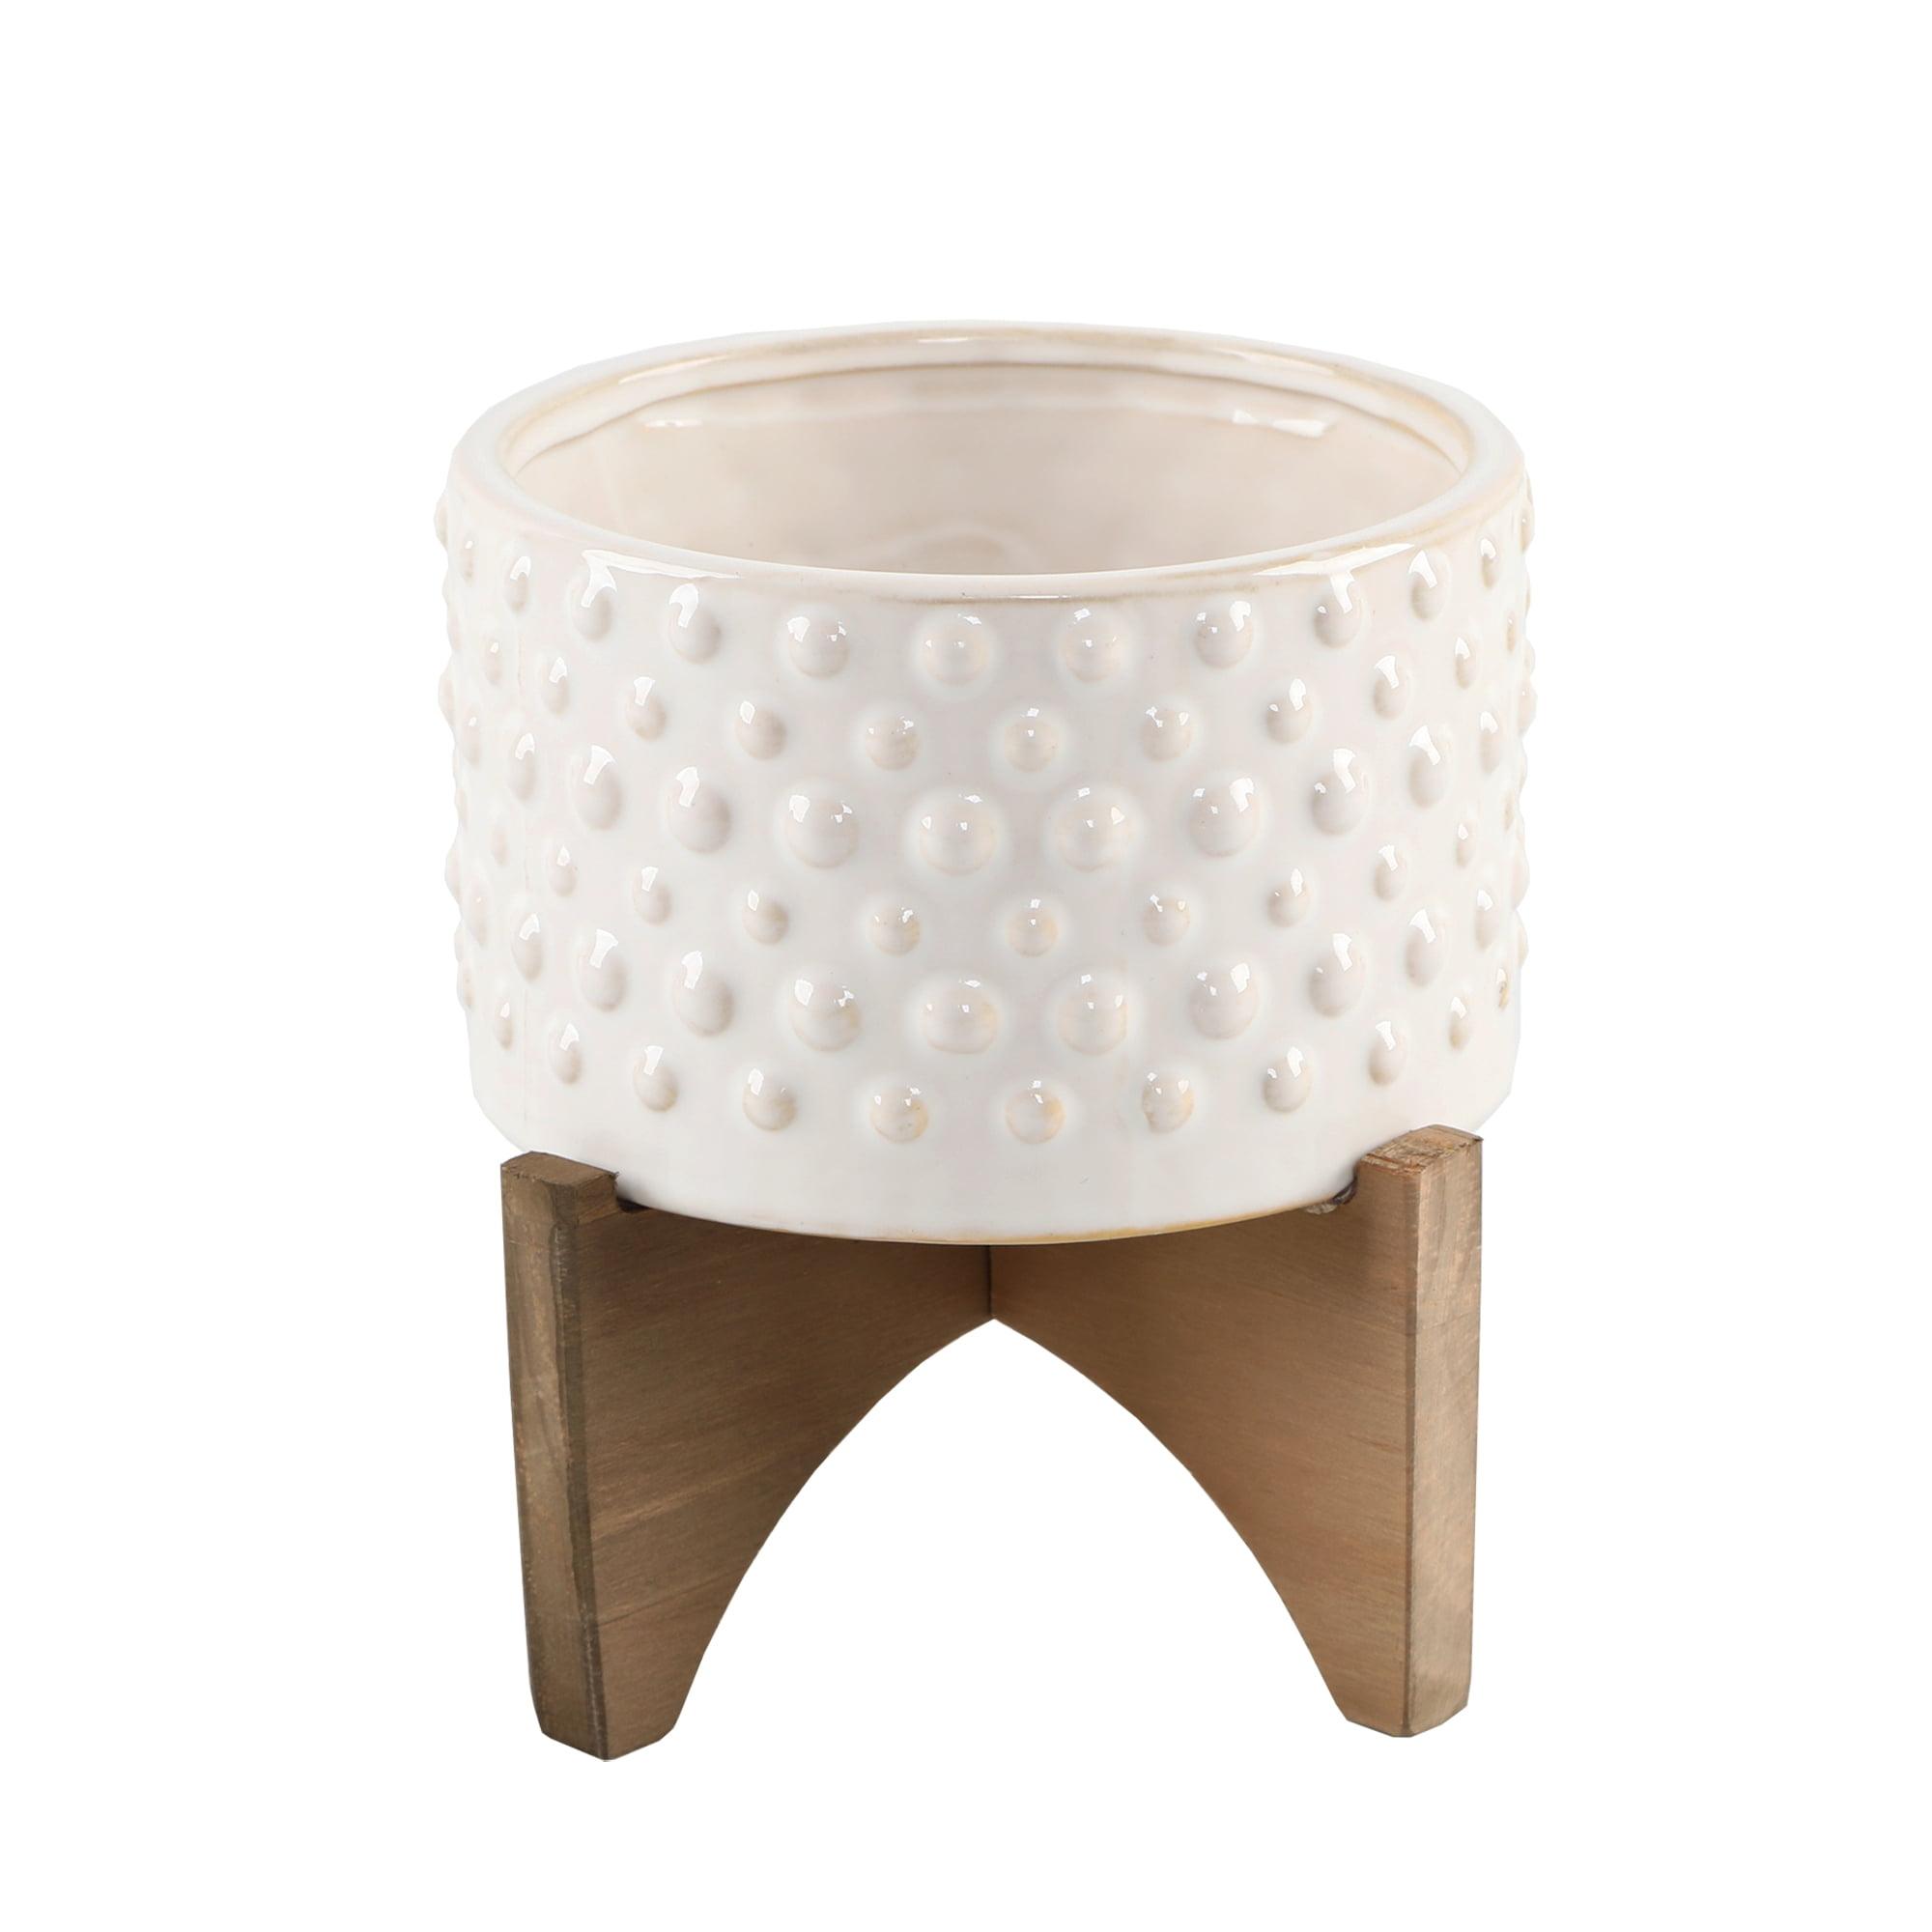 Artisanal Ivory Hobnail 6.25" Ceramic Planter with Wood Stand